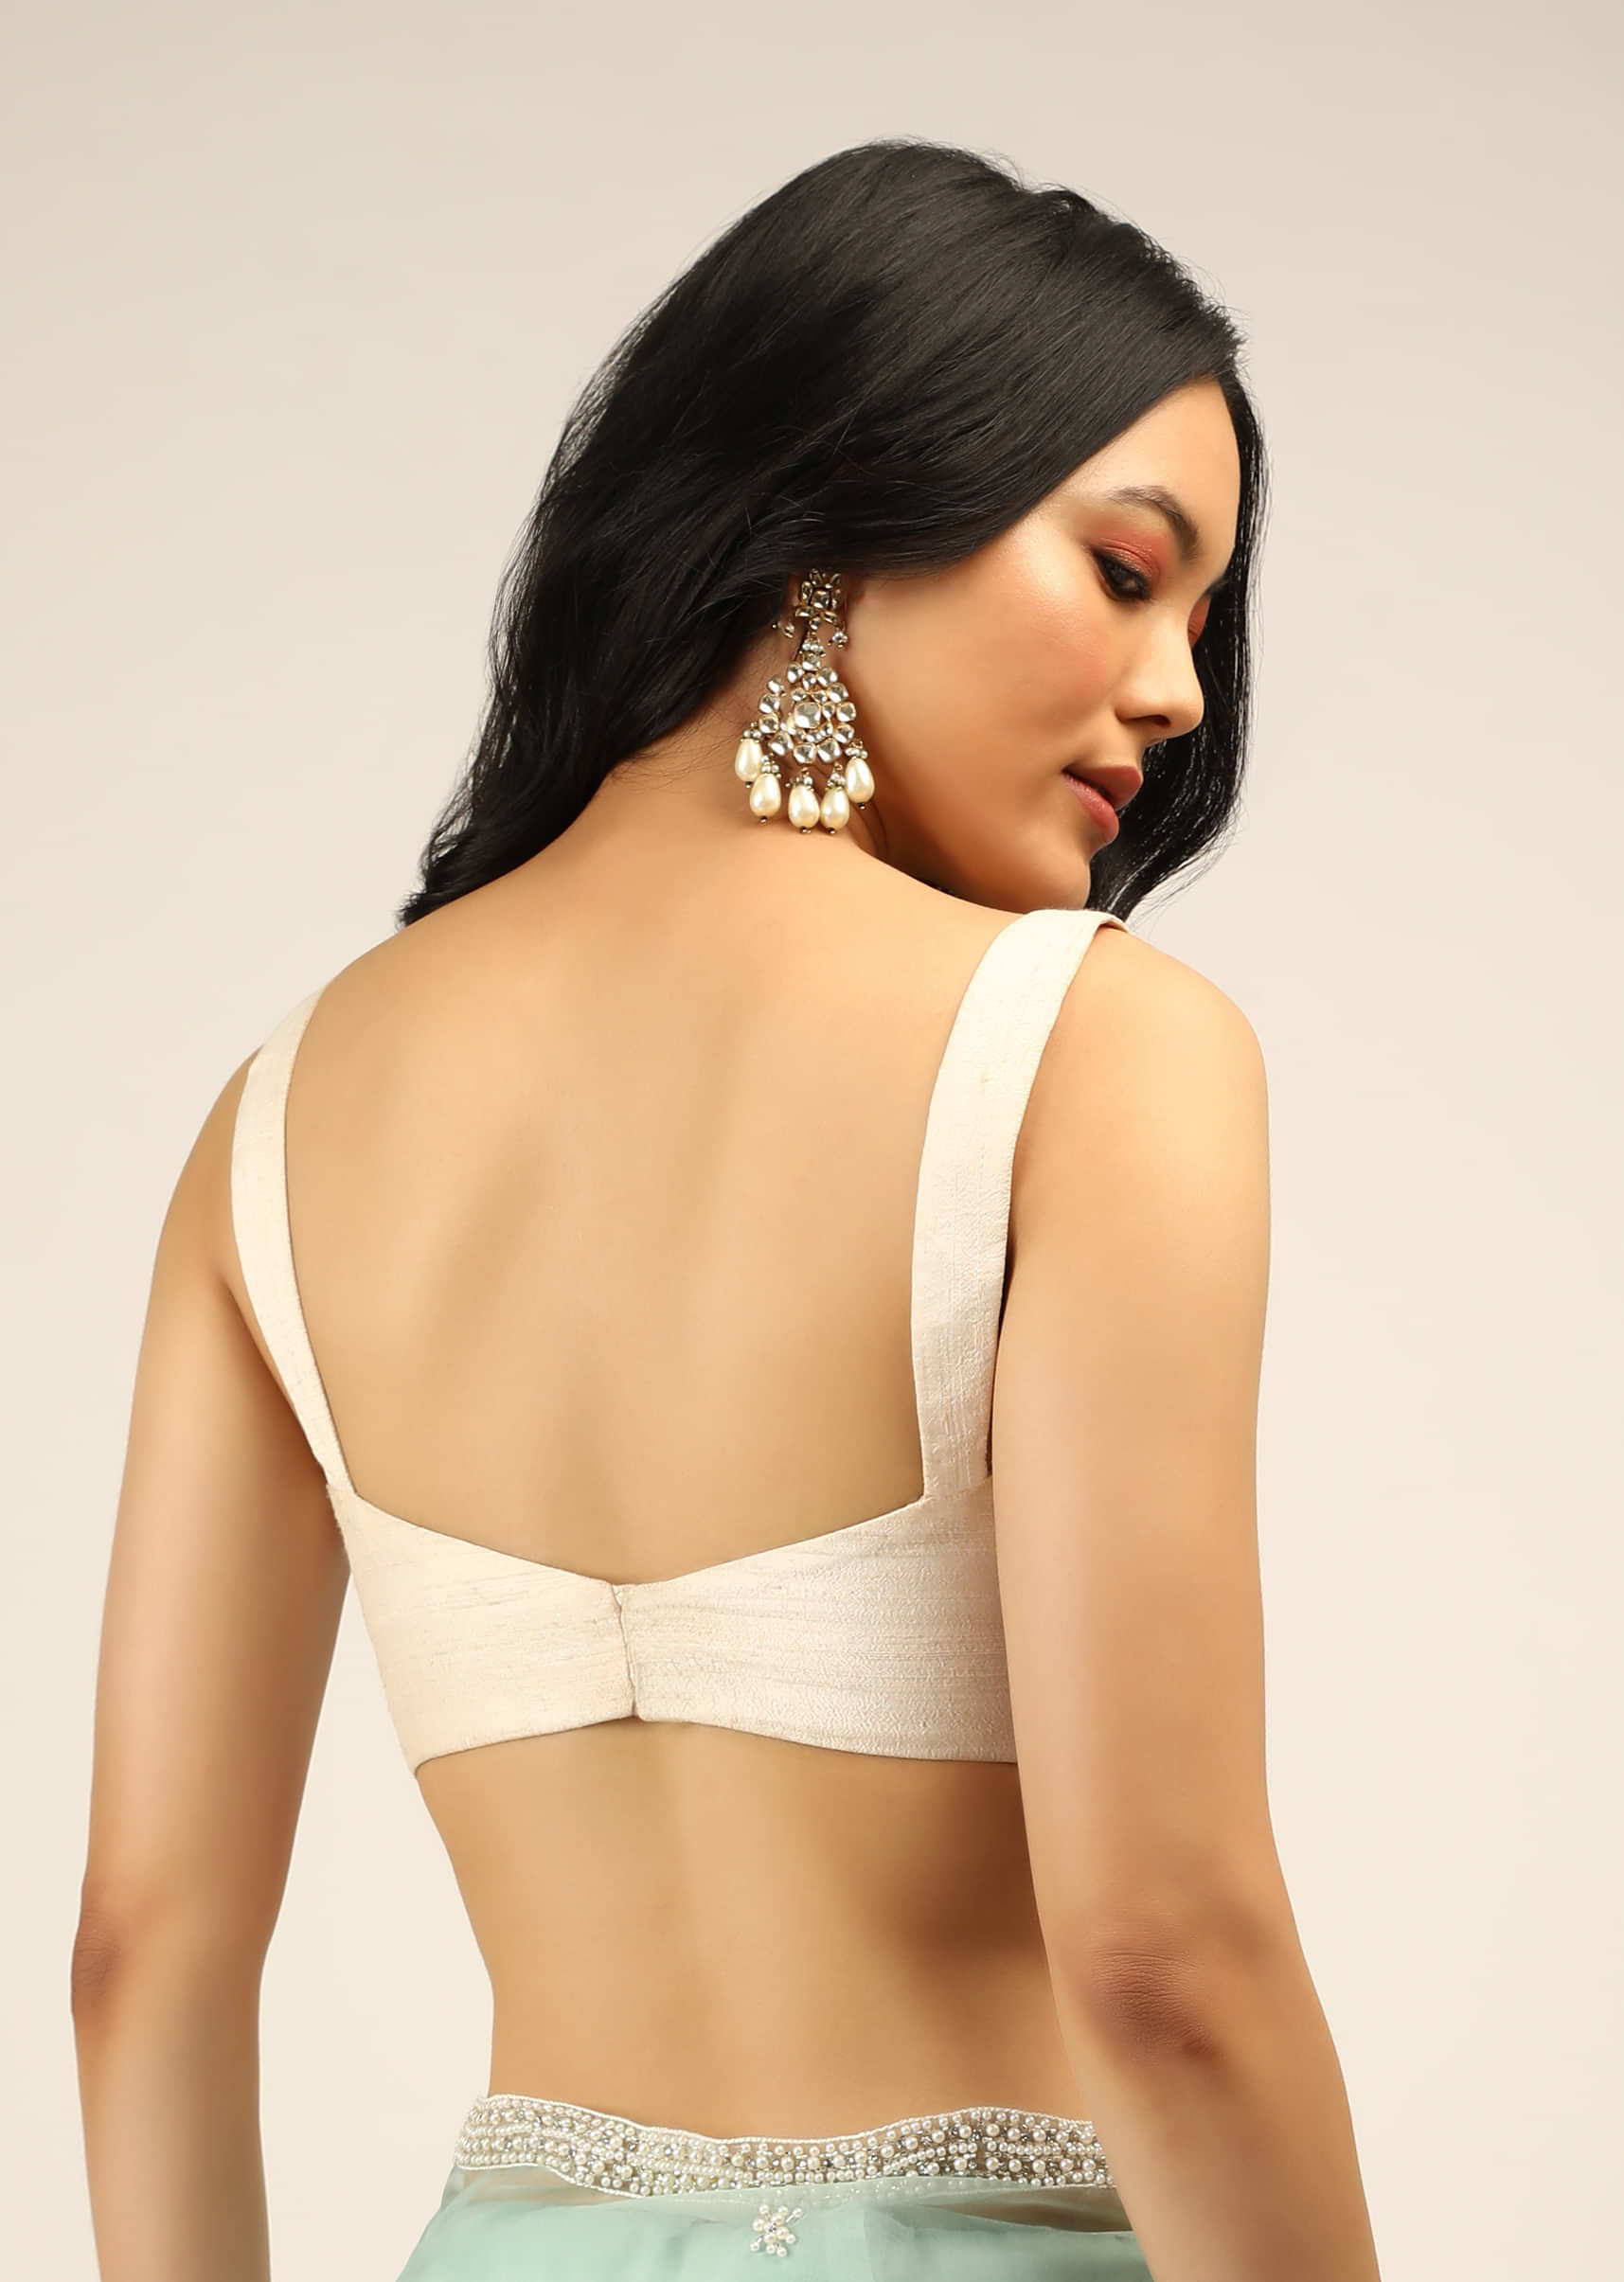 Off White Sleeveless Blouse In Raw Silk With Corset Neckline And Straps On The Shoulder  